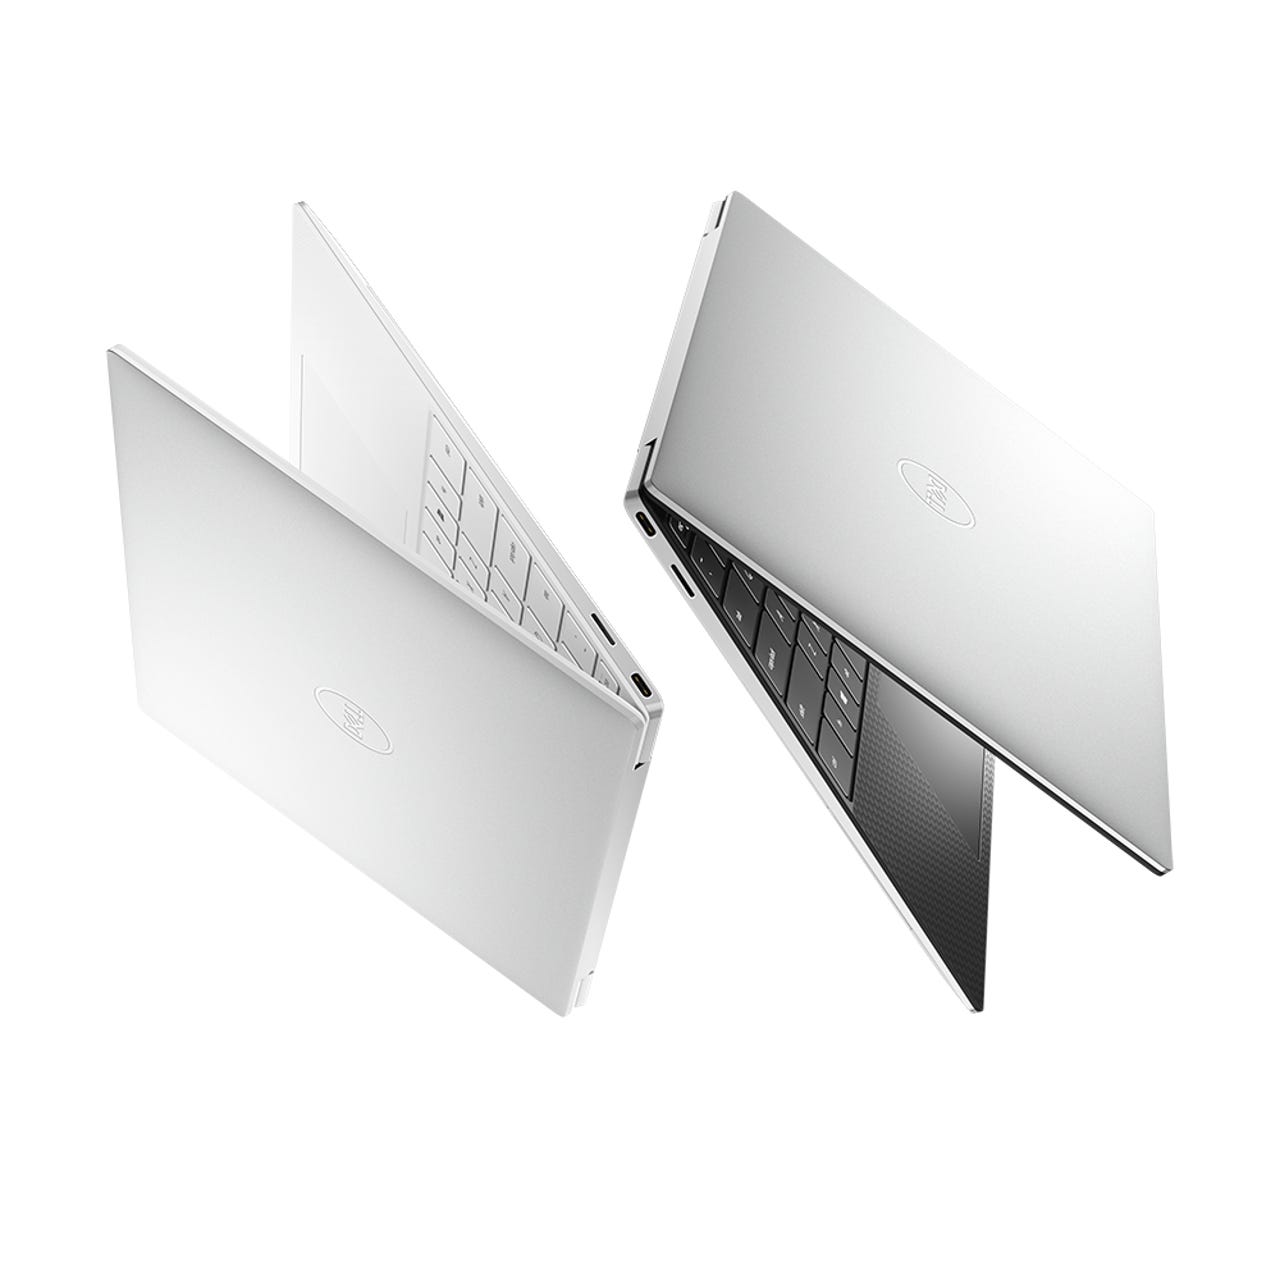 xps-13-black-and-white-side.png